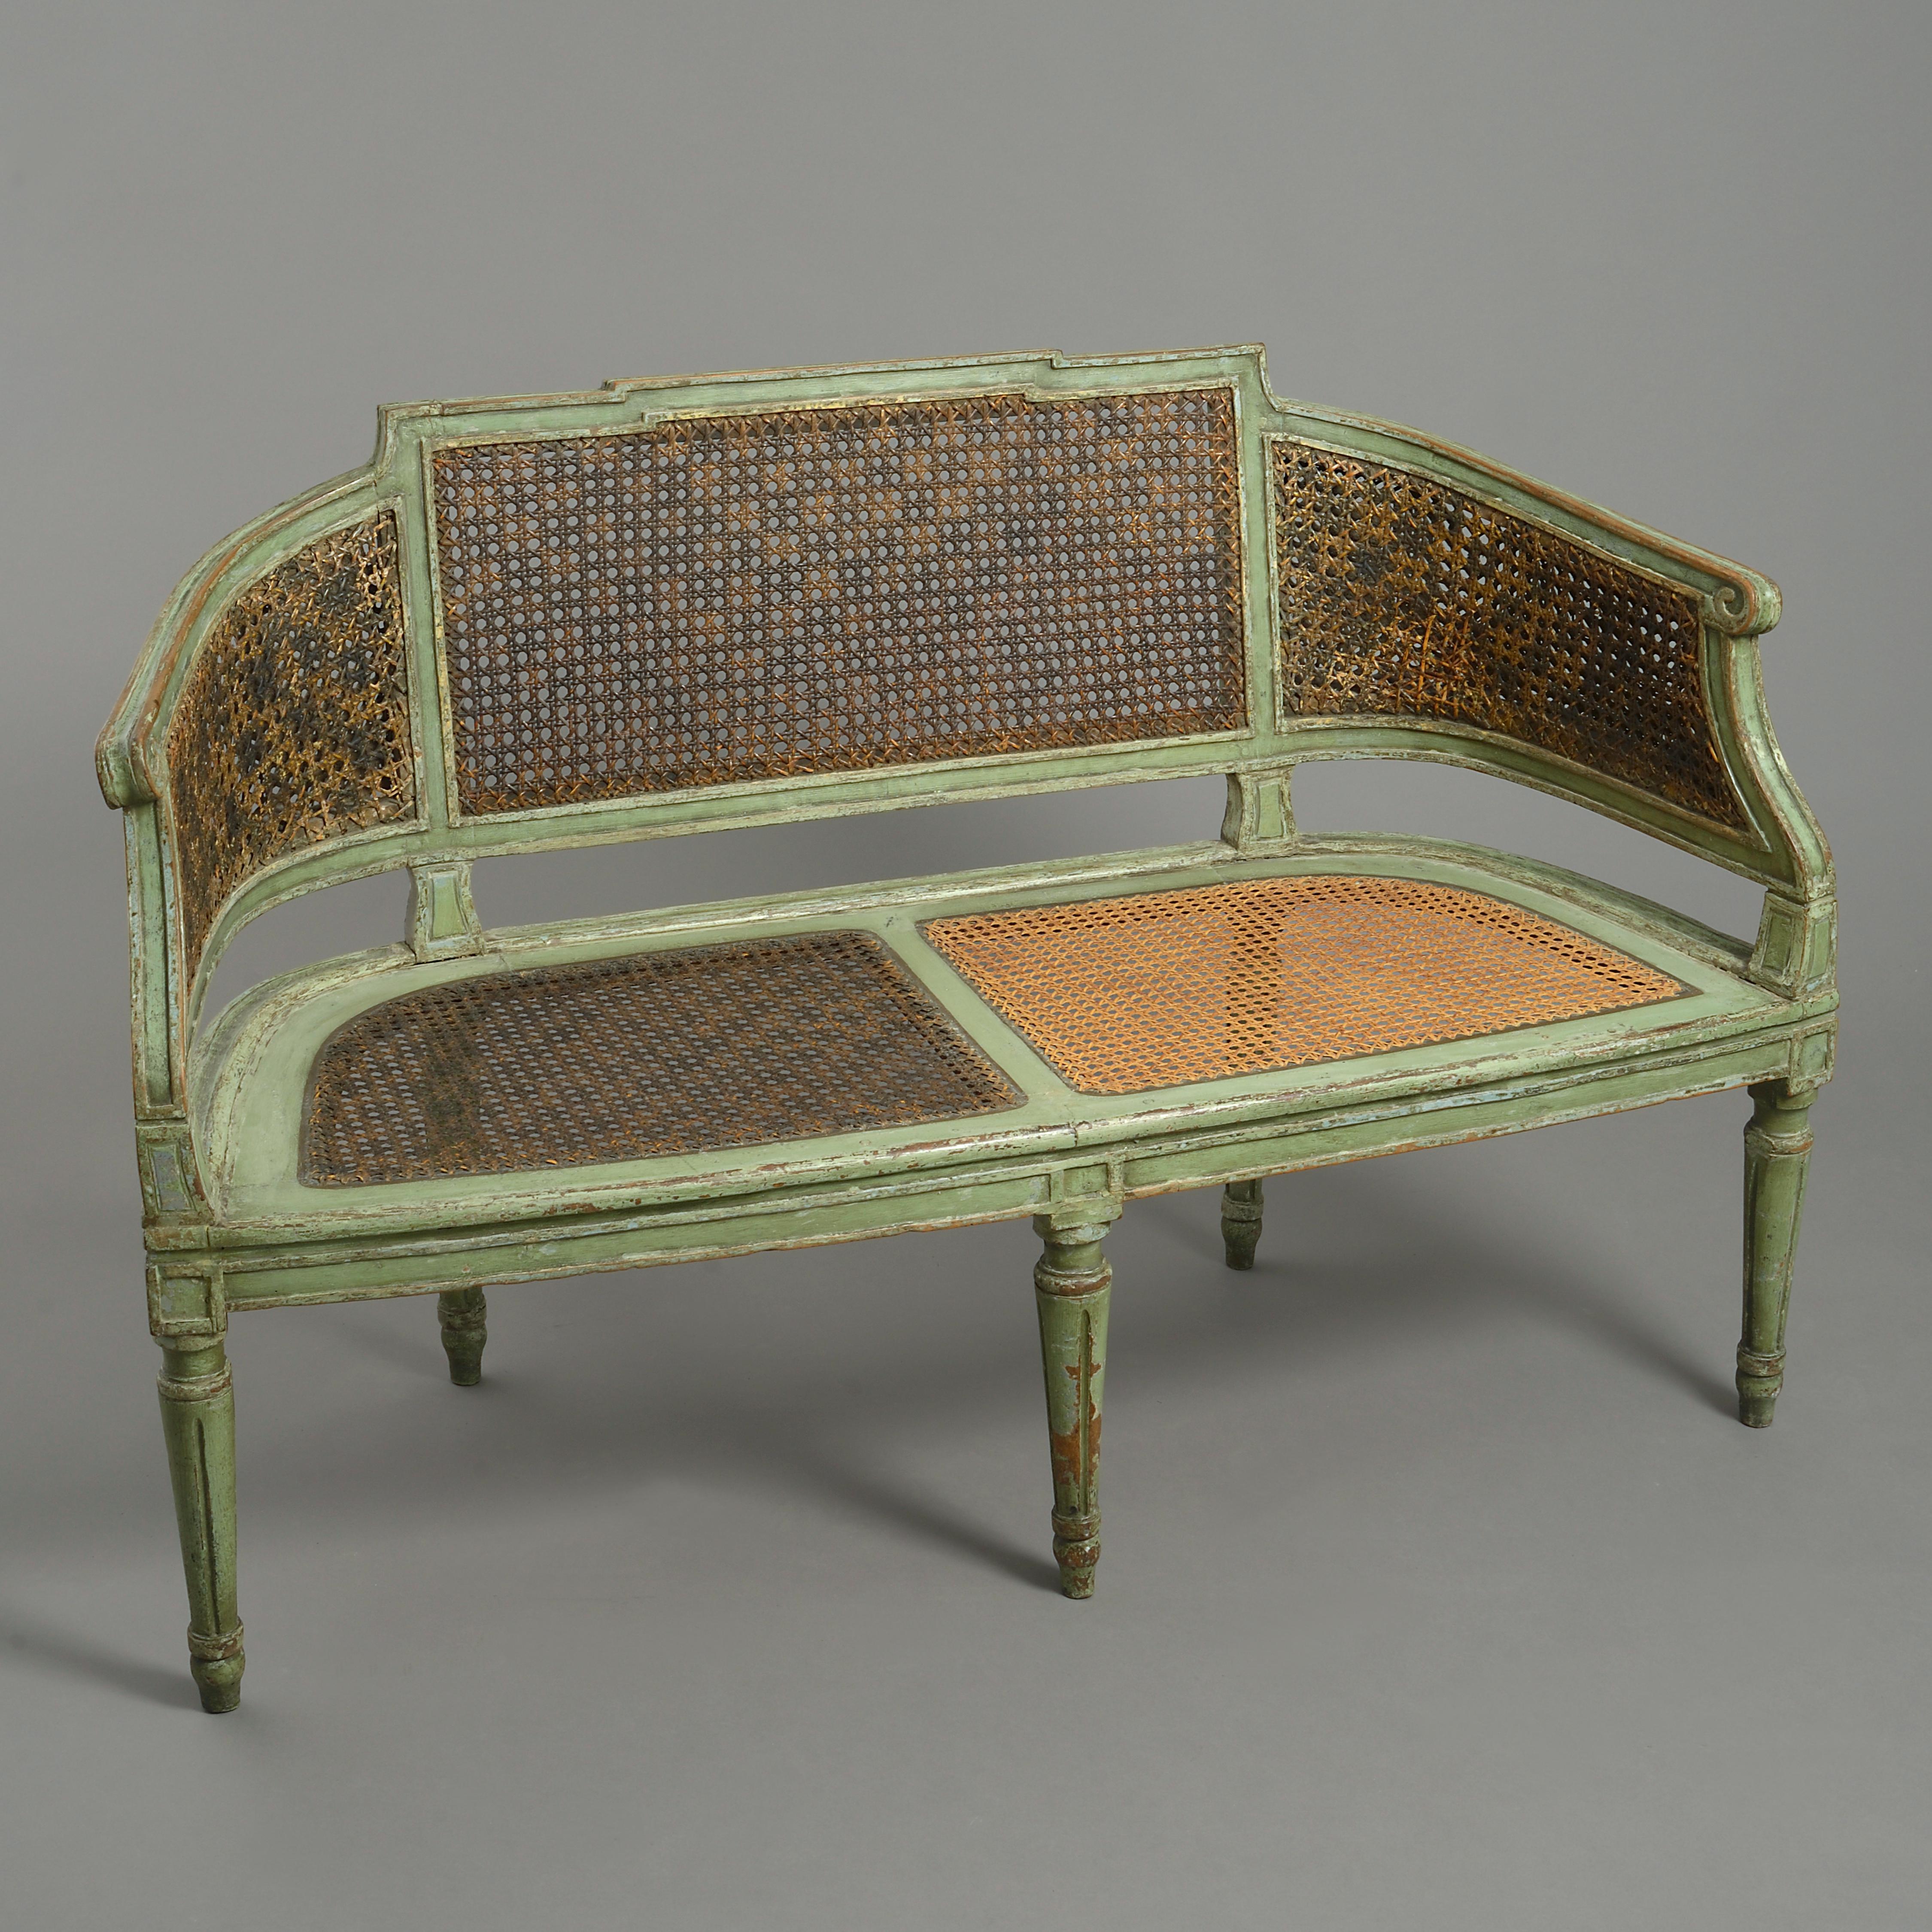 A late 18th century painted canapé sofa in the neoclassical taste, the green painted channeled frame with caned back and seat panels and raised upon turned tapering fluted legs. Having a drop in seat.
  